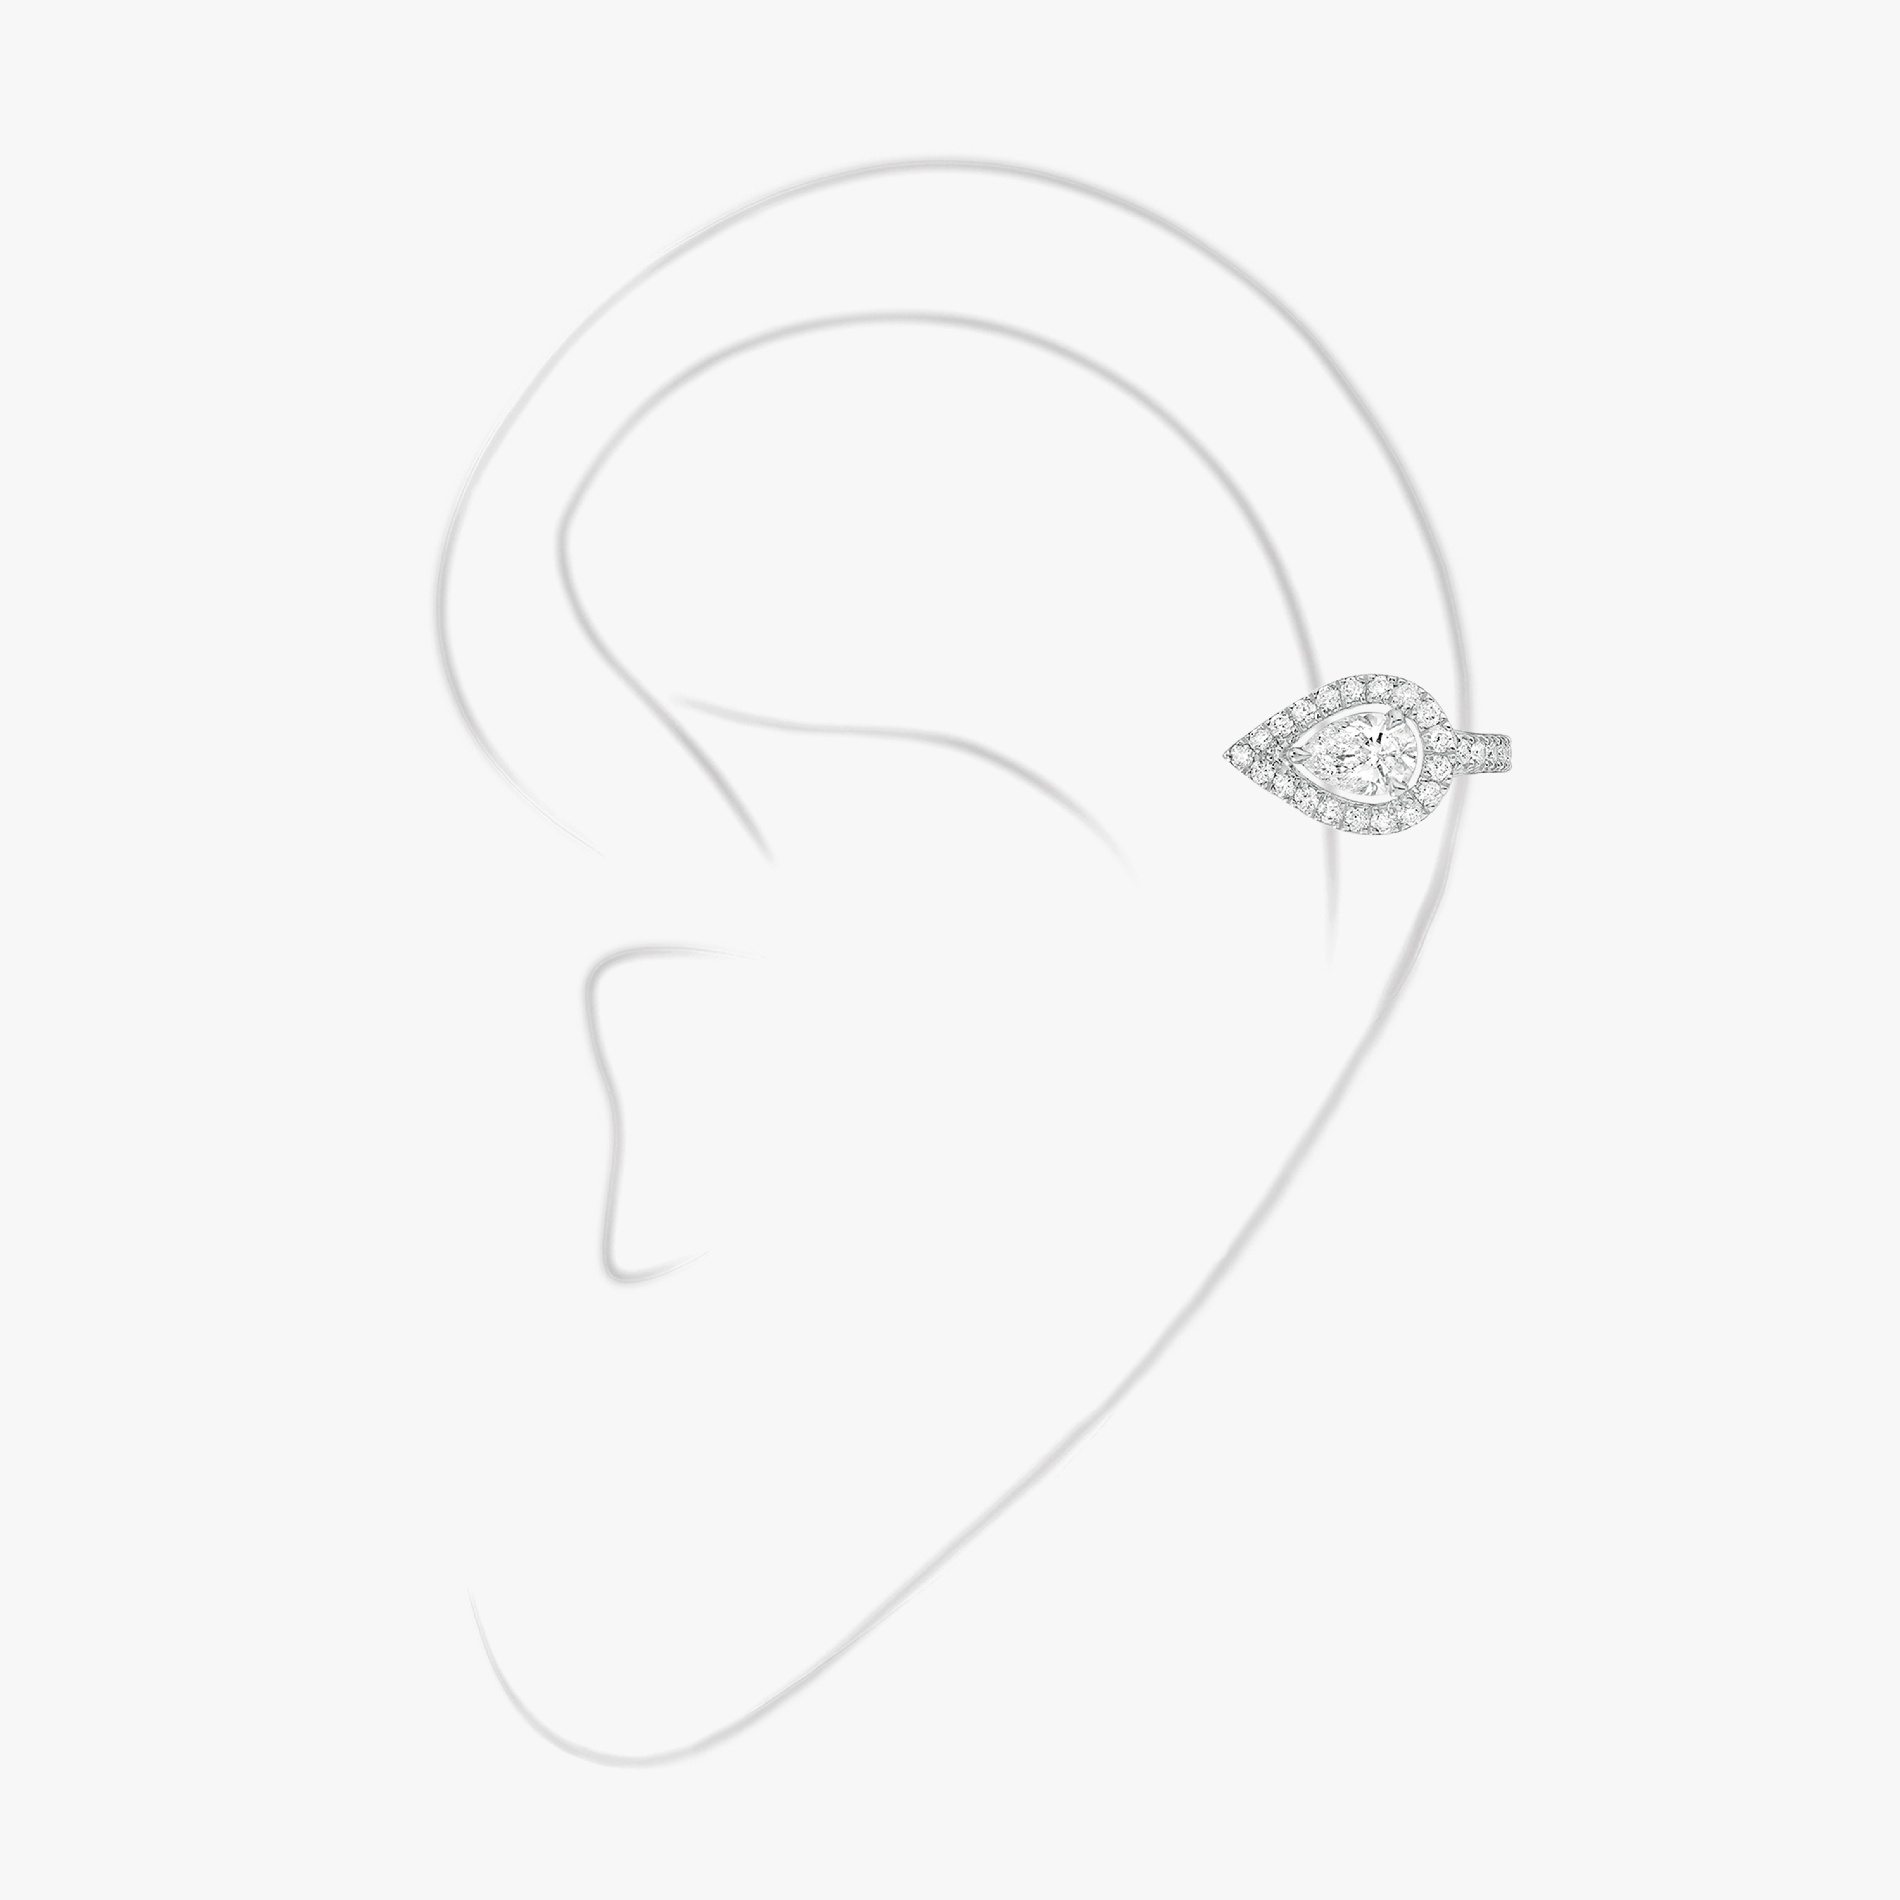 My Twin Top Mono Earring PS 0.15ct White Gold For Her Diamond Earrings 07442-WG